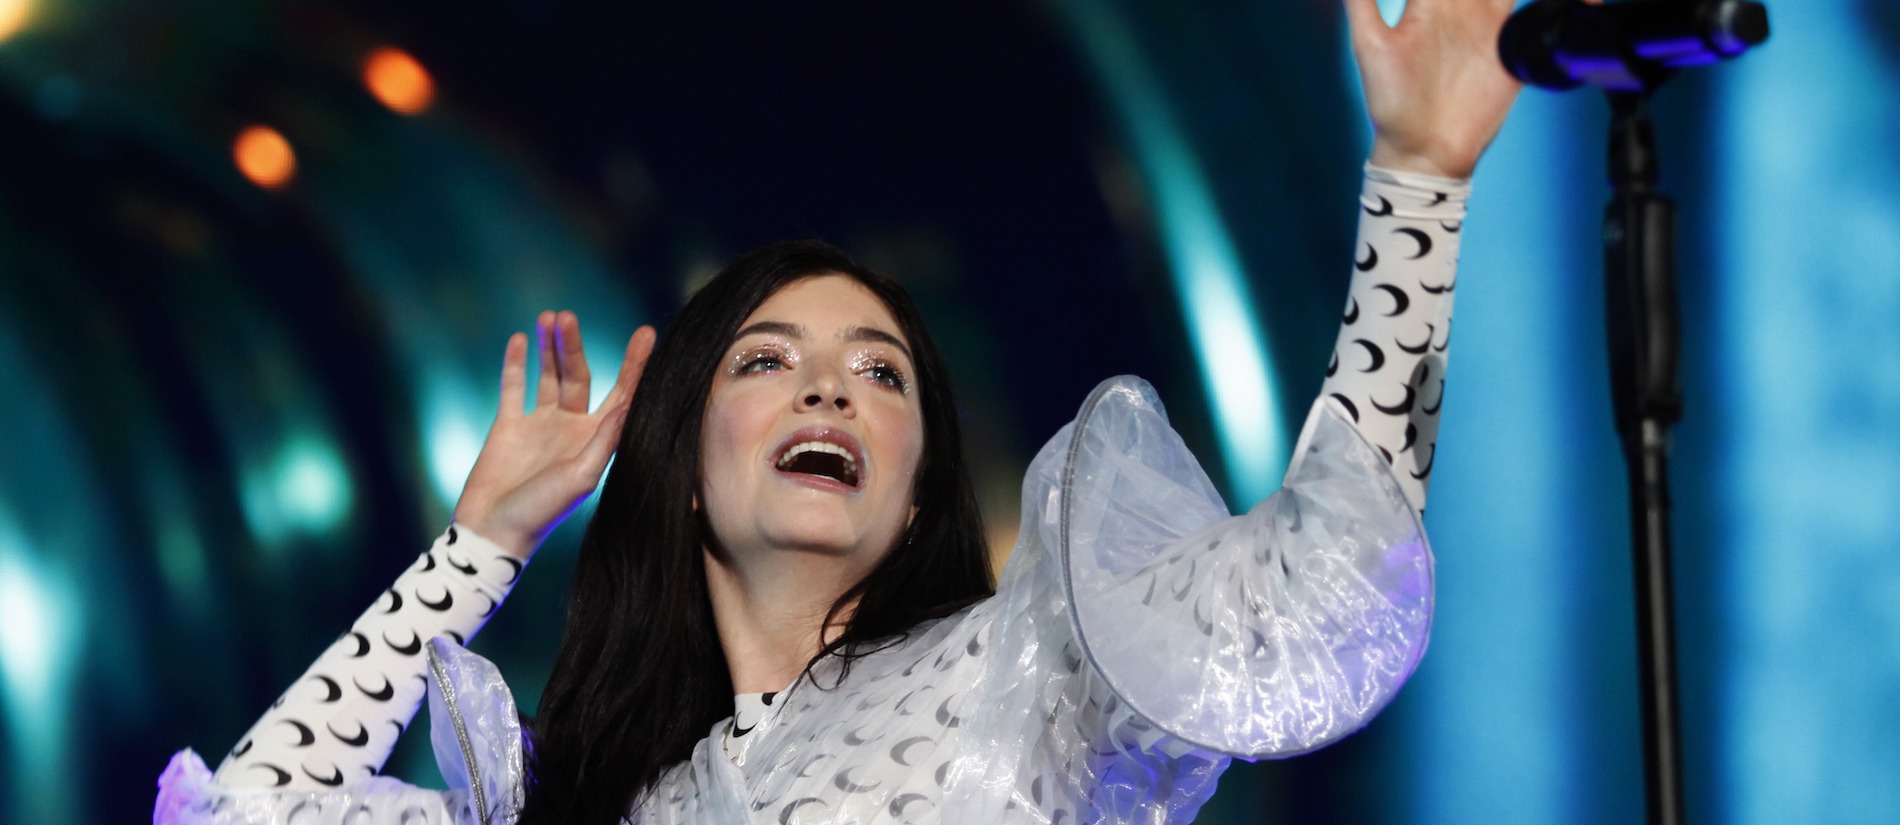 Lorde's Revealing Supposed Album Cover Is Inspiring All ...